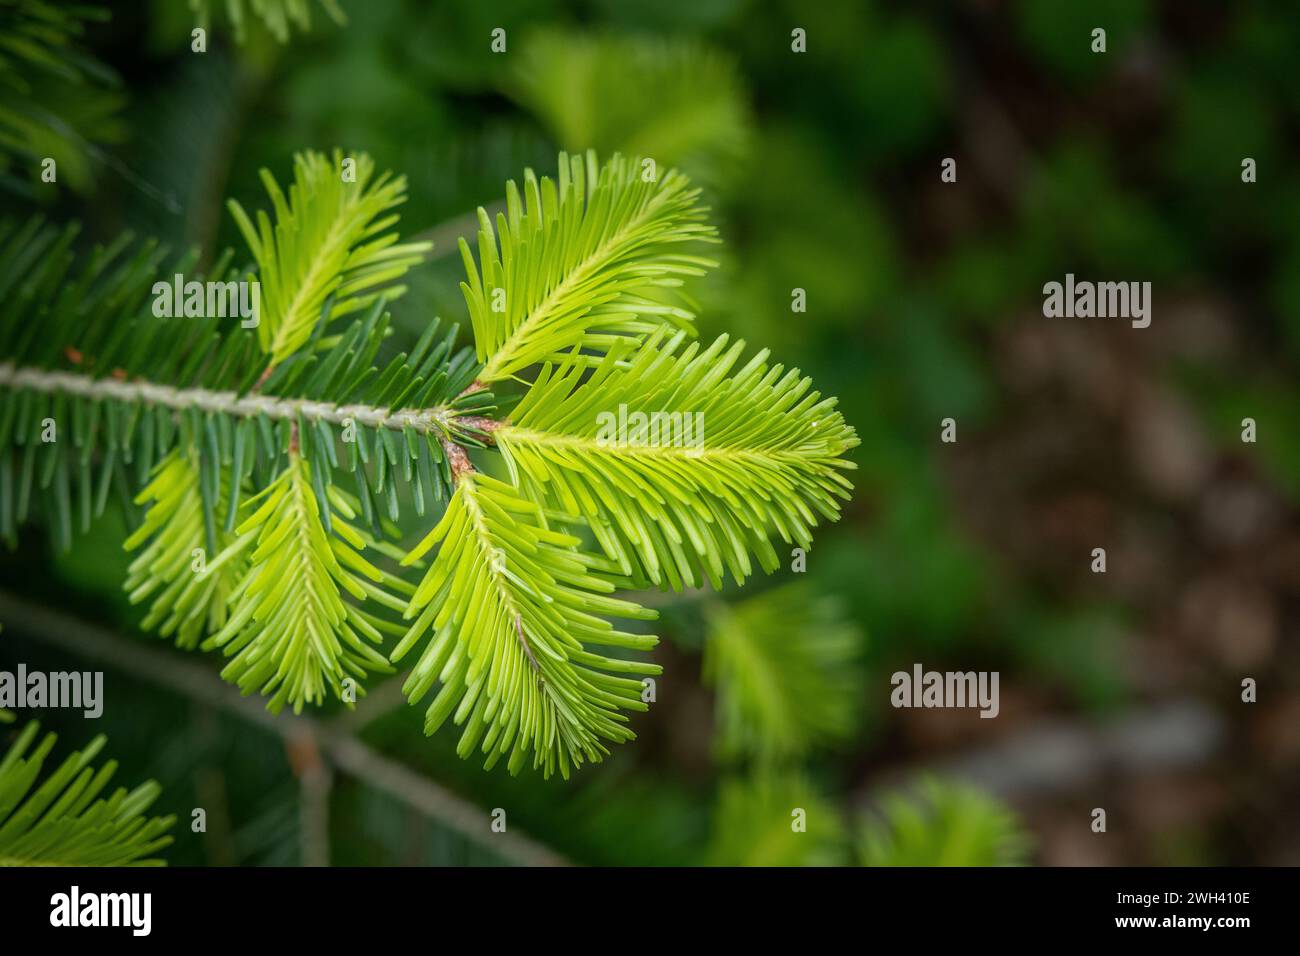 A silver fir (Abies alba) branch with young shoots at the beginning of Spring season. Stock Photo